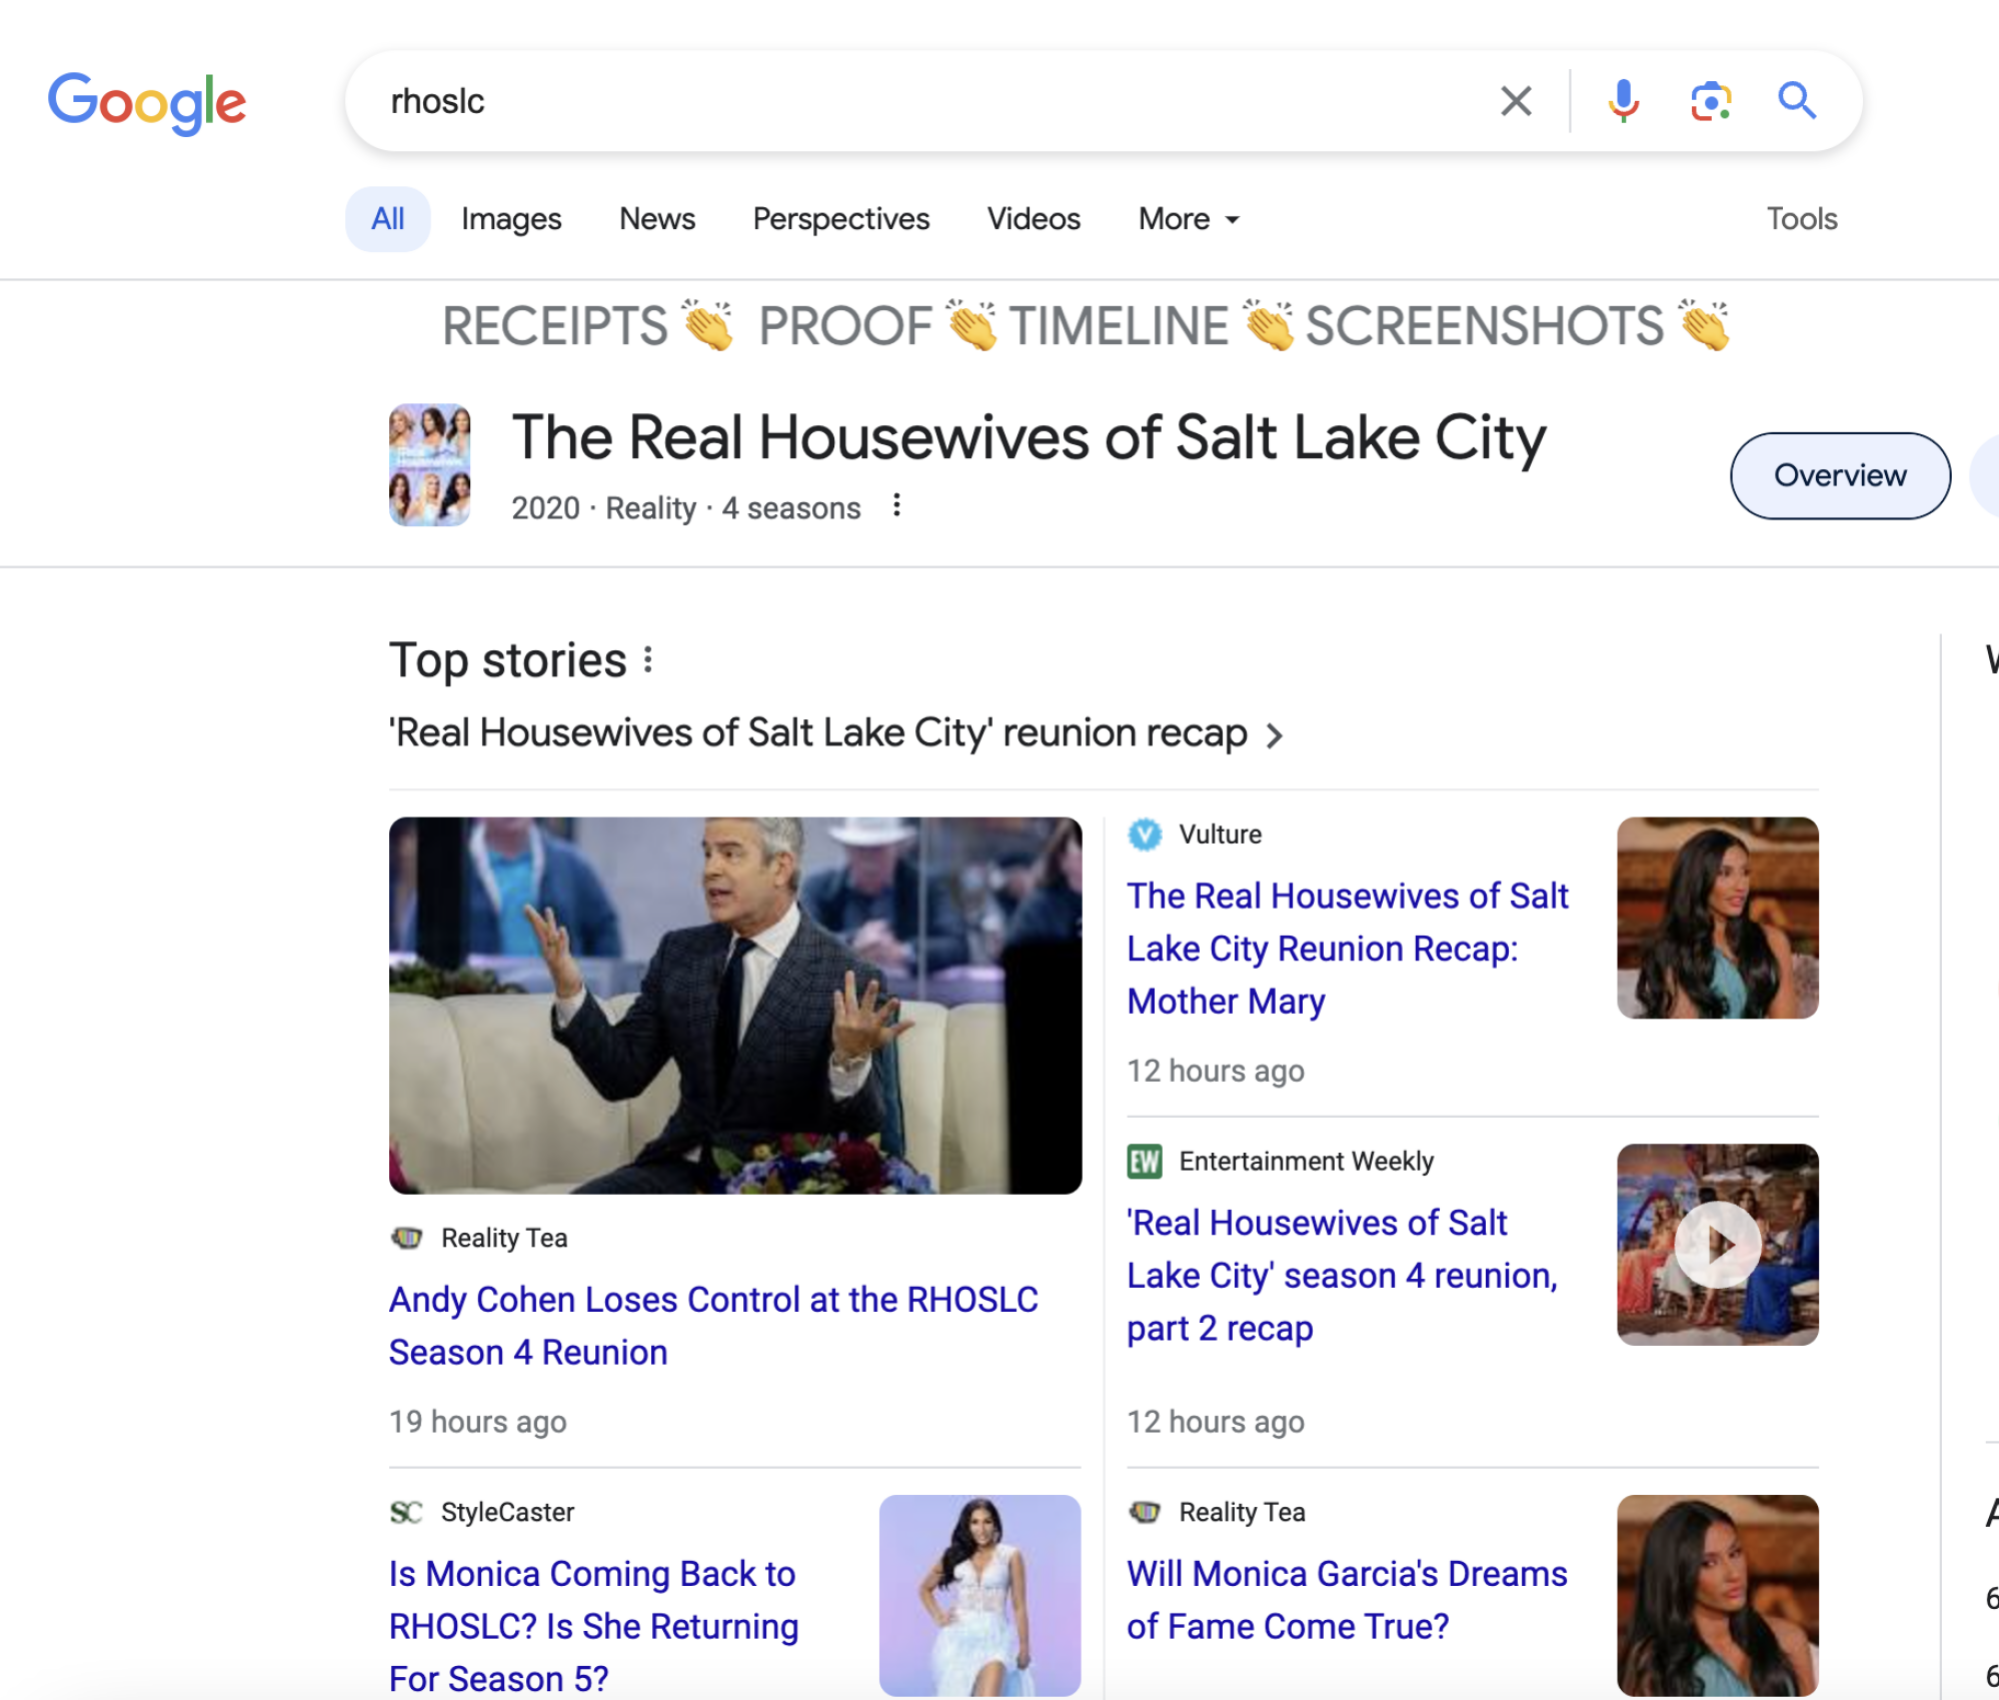 screenshot showing a google search and a banner reading RECEIPTS 👏 PROOF 👏 TIMELINE 👏 SCREENSHOTS 👏